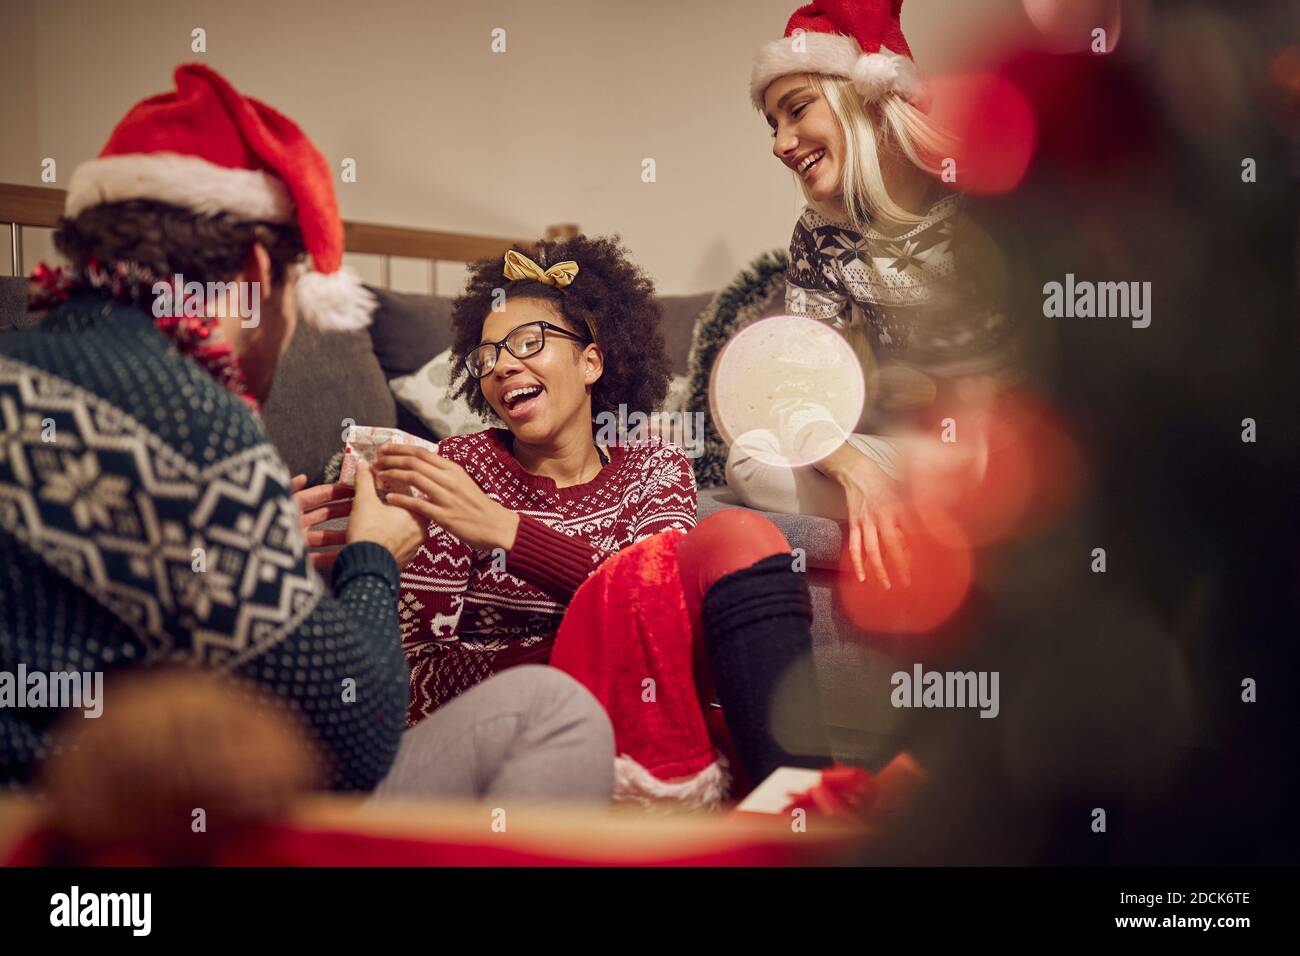 A young girl getting present from friend  in relaxed atmosphere at New Year's Eve home party. Xmas, New Year, friends, celebration Stock Photo